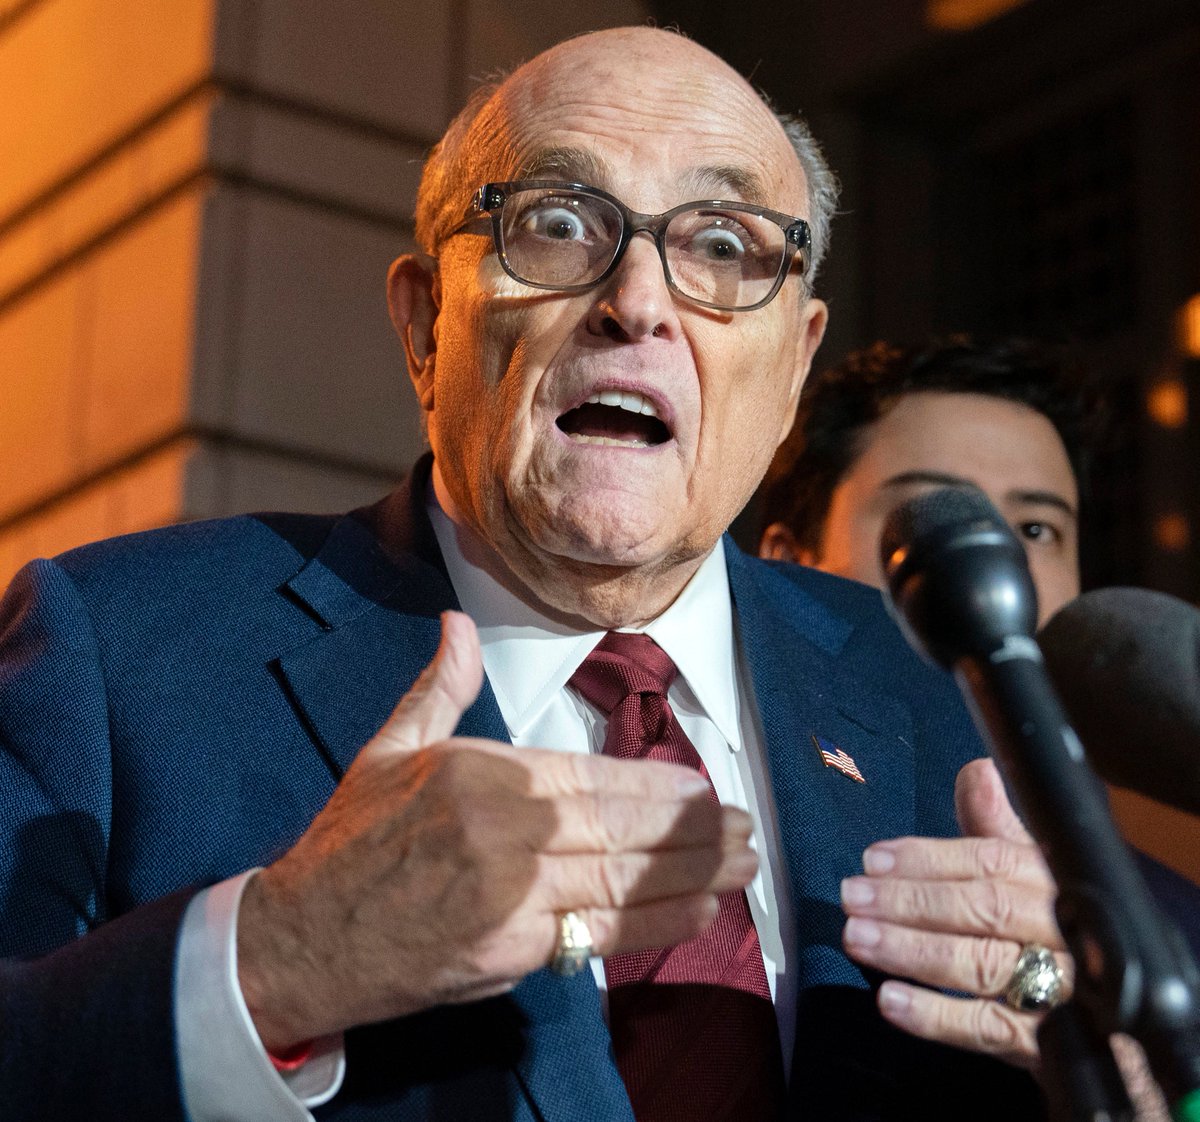 BREAKING: MAGA henchman Rudy Giuliani is found guilty of defaming two Georgia poll workers and ordered to pay a truly staggering $148 million in damages. This is justice of the purest form.... The verdict is an absolute disaster for the financially devastated Giuliani and a…